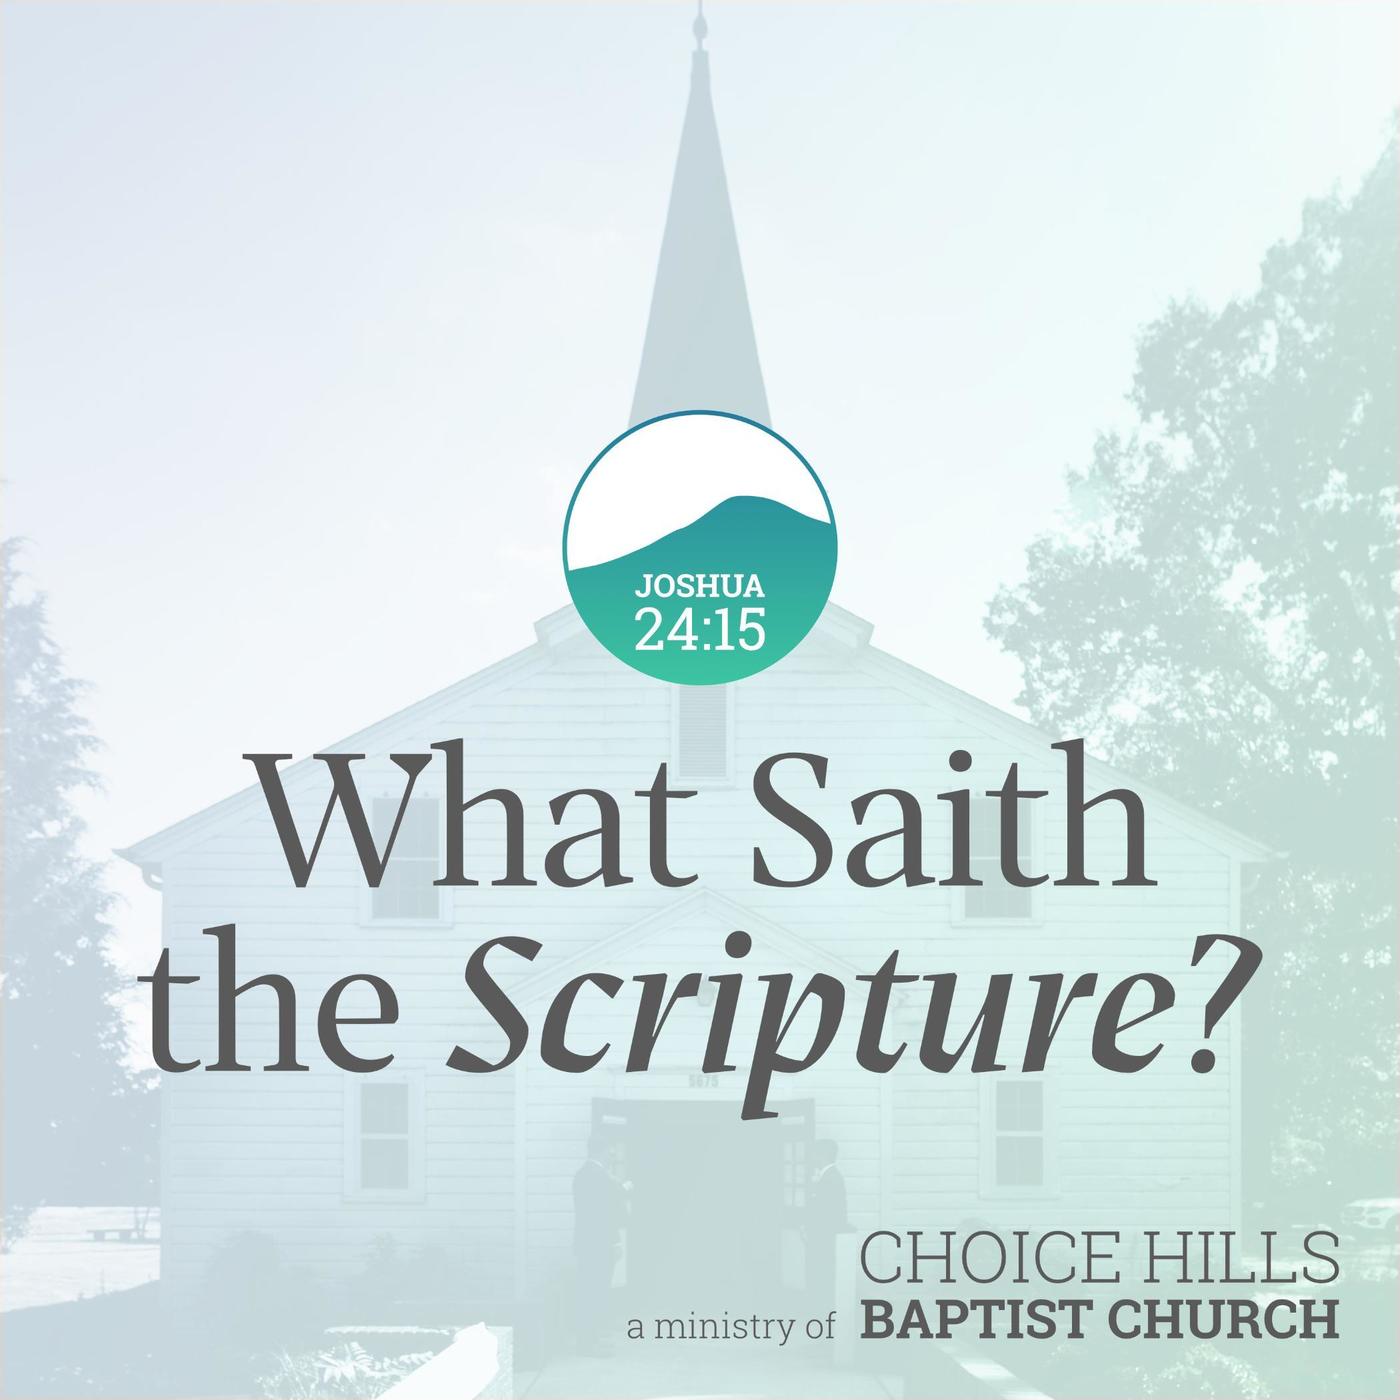 Adult Sunday School: Study of the 119th Psalm (Part 2)